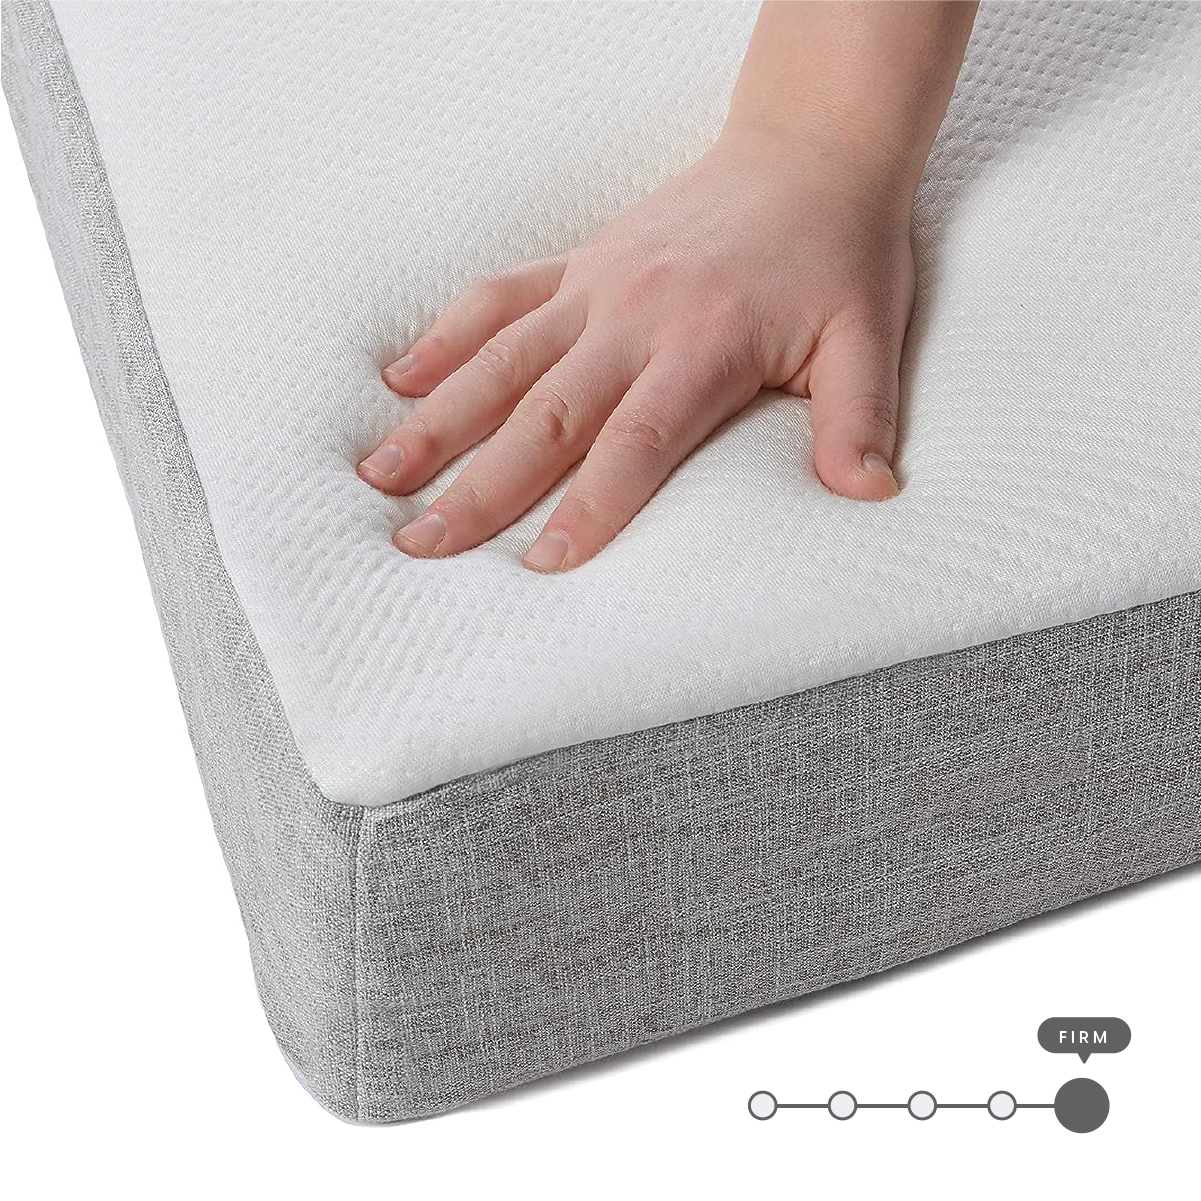 Milliard 5 in. Memory Foam Mattress - for Bunk Bed, Daybed, Trundle or Folding Bed Replacement (Twin)